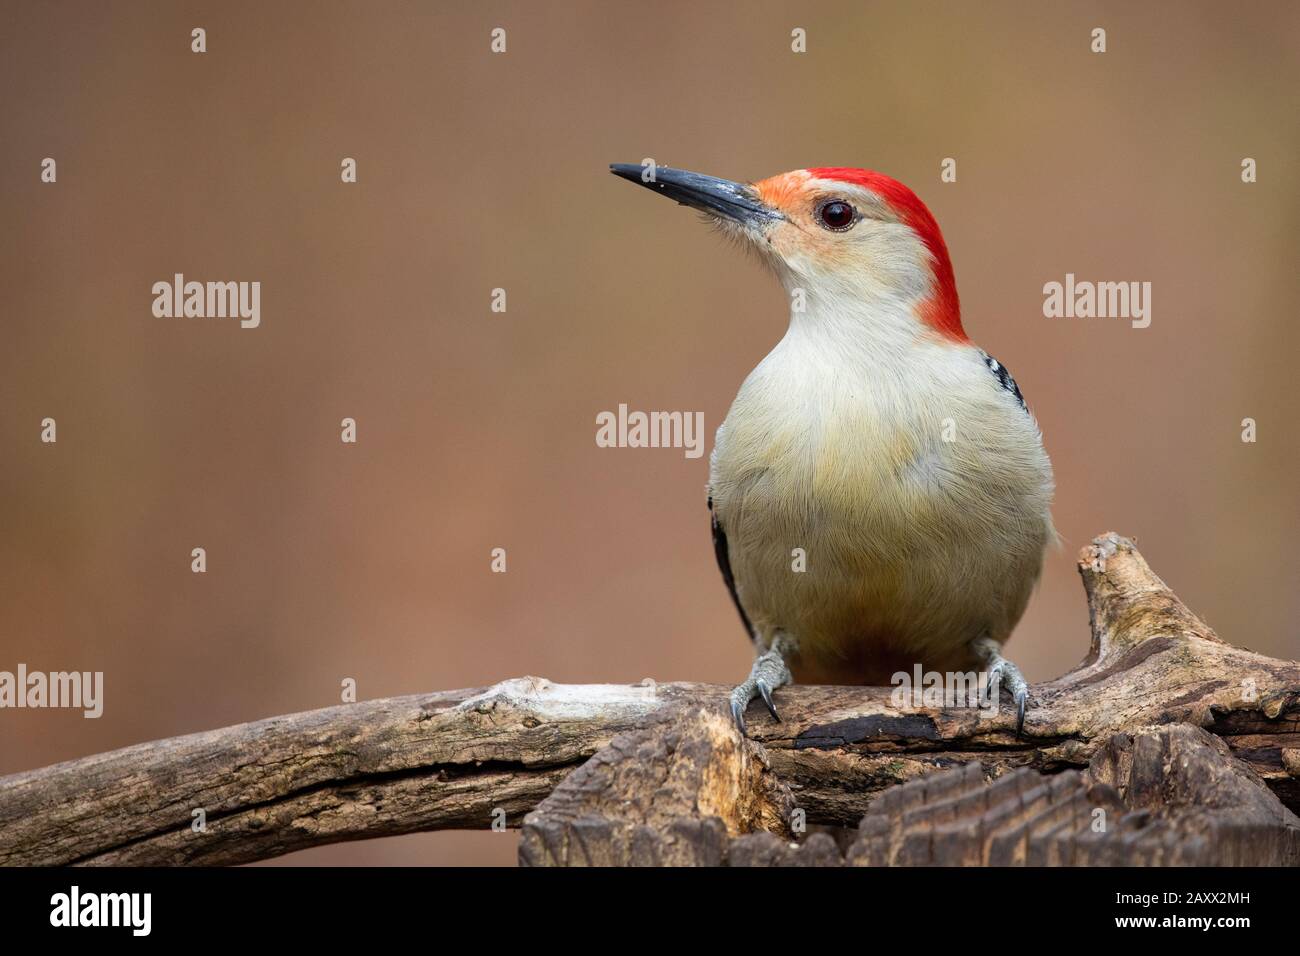 Red Bellied Woodpecker Melanerpes carolinus Profile on a fallen tree trunk at Ojibway Park Nature Reserve in Windsor, Ontario Canada Stock Photo